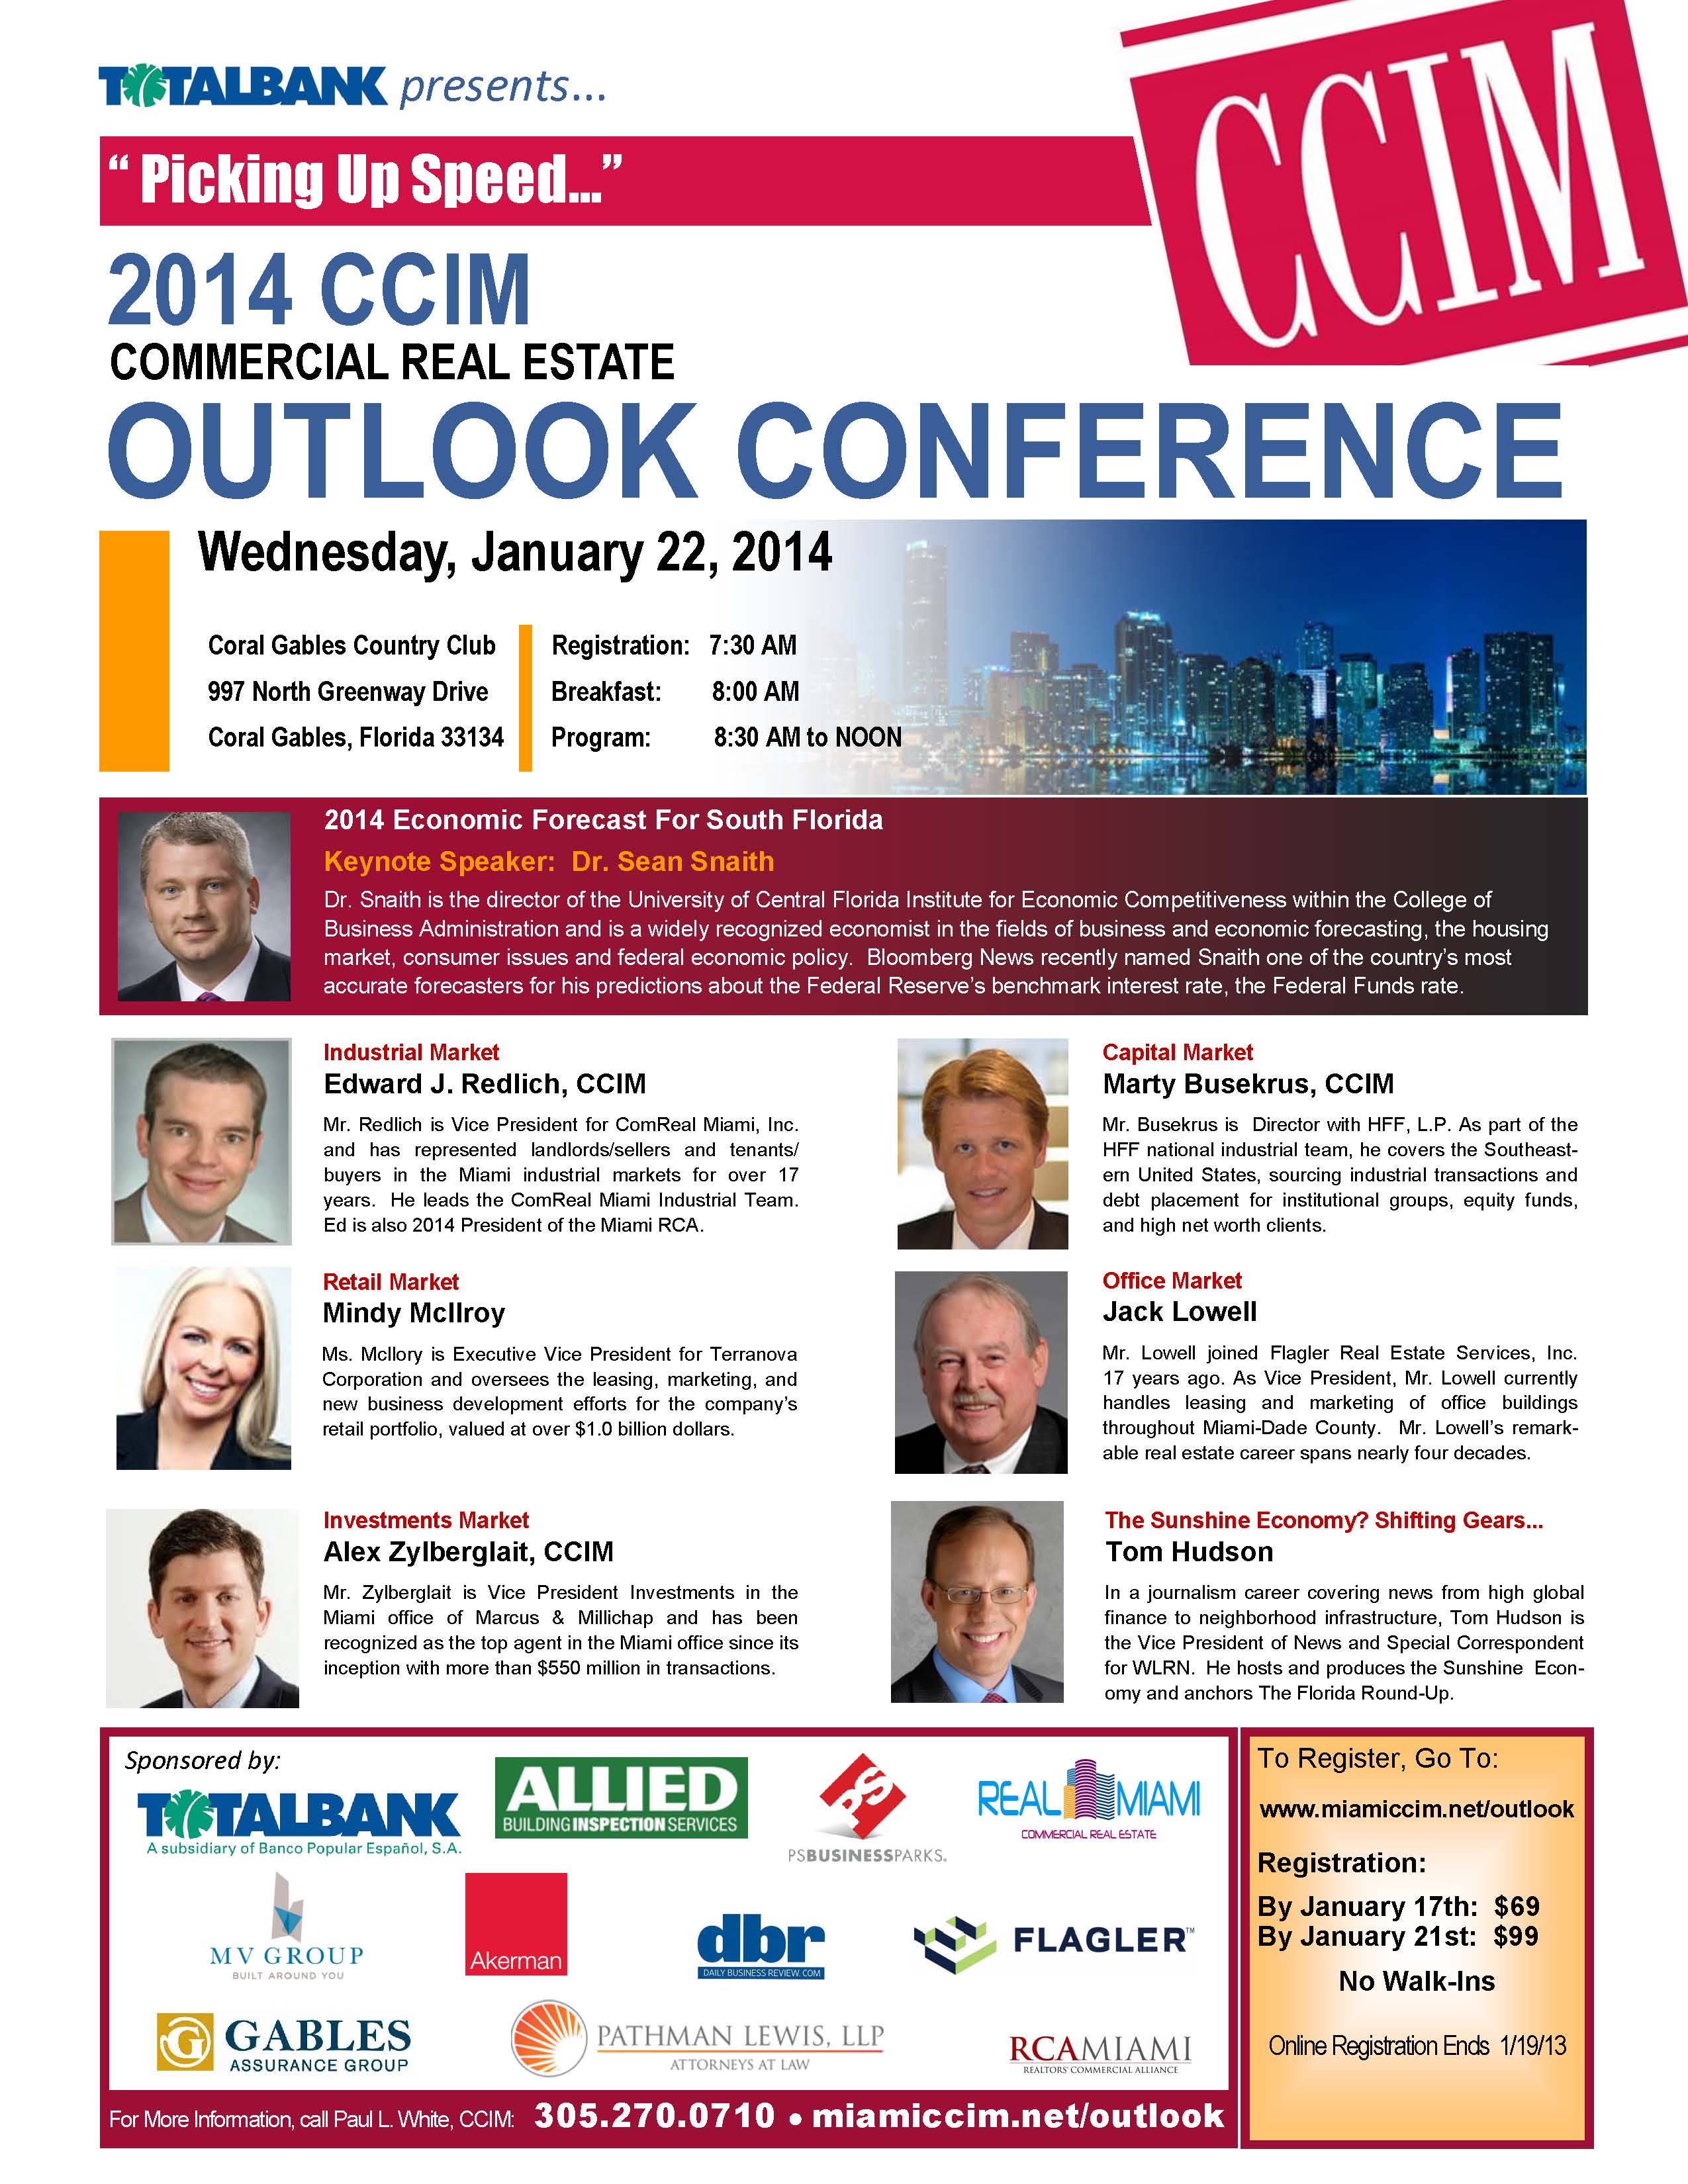 CCIM Miami 2014 Commercial Real Estate Outlook Conference